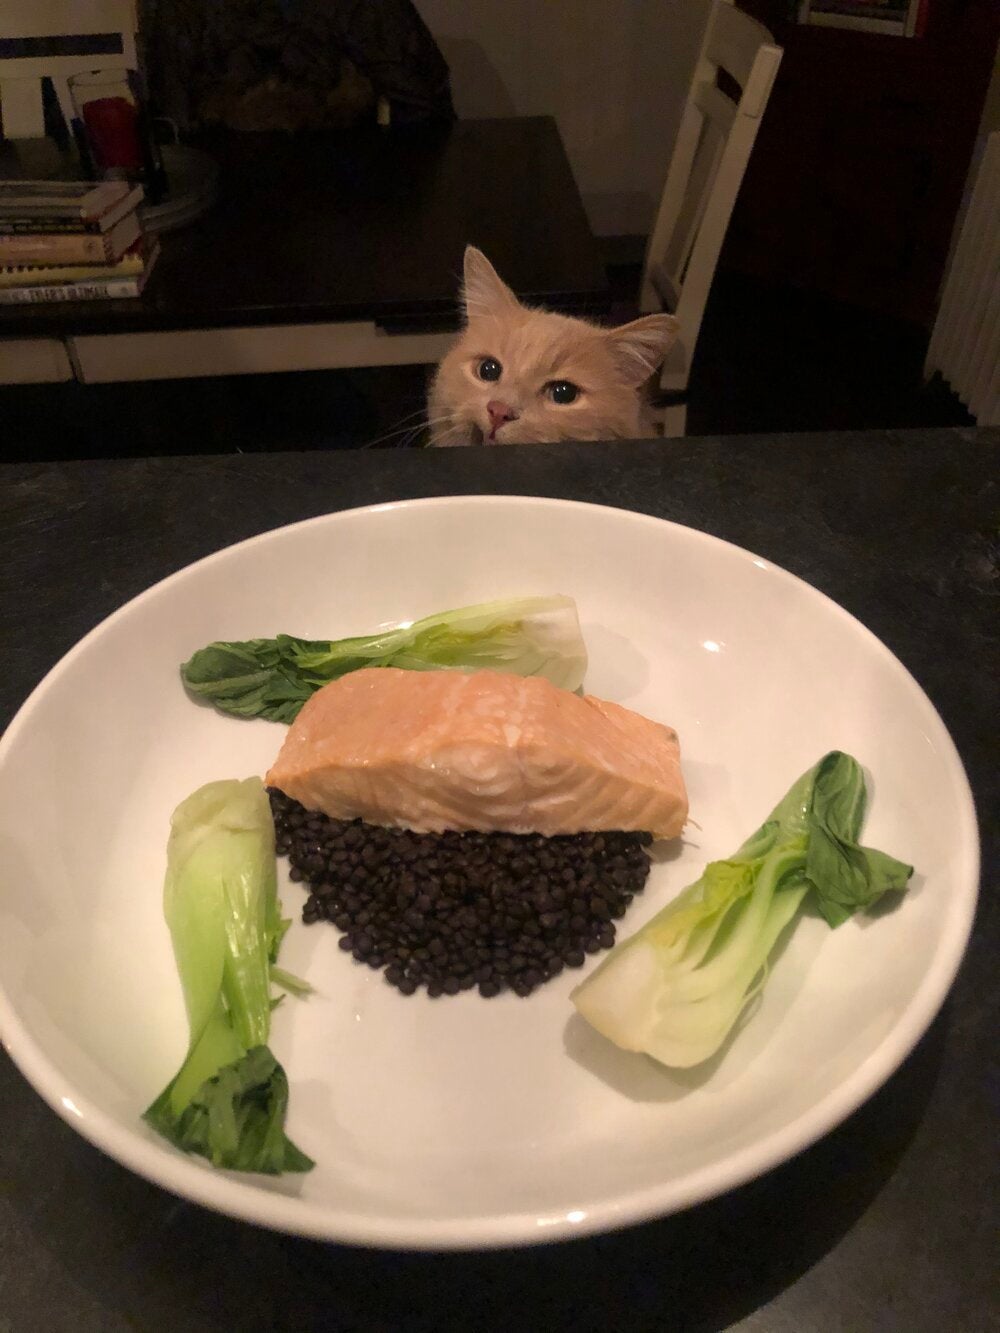 Cat staring at plate of steamed salmon with lentils and bok choy